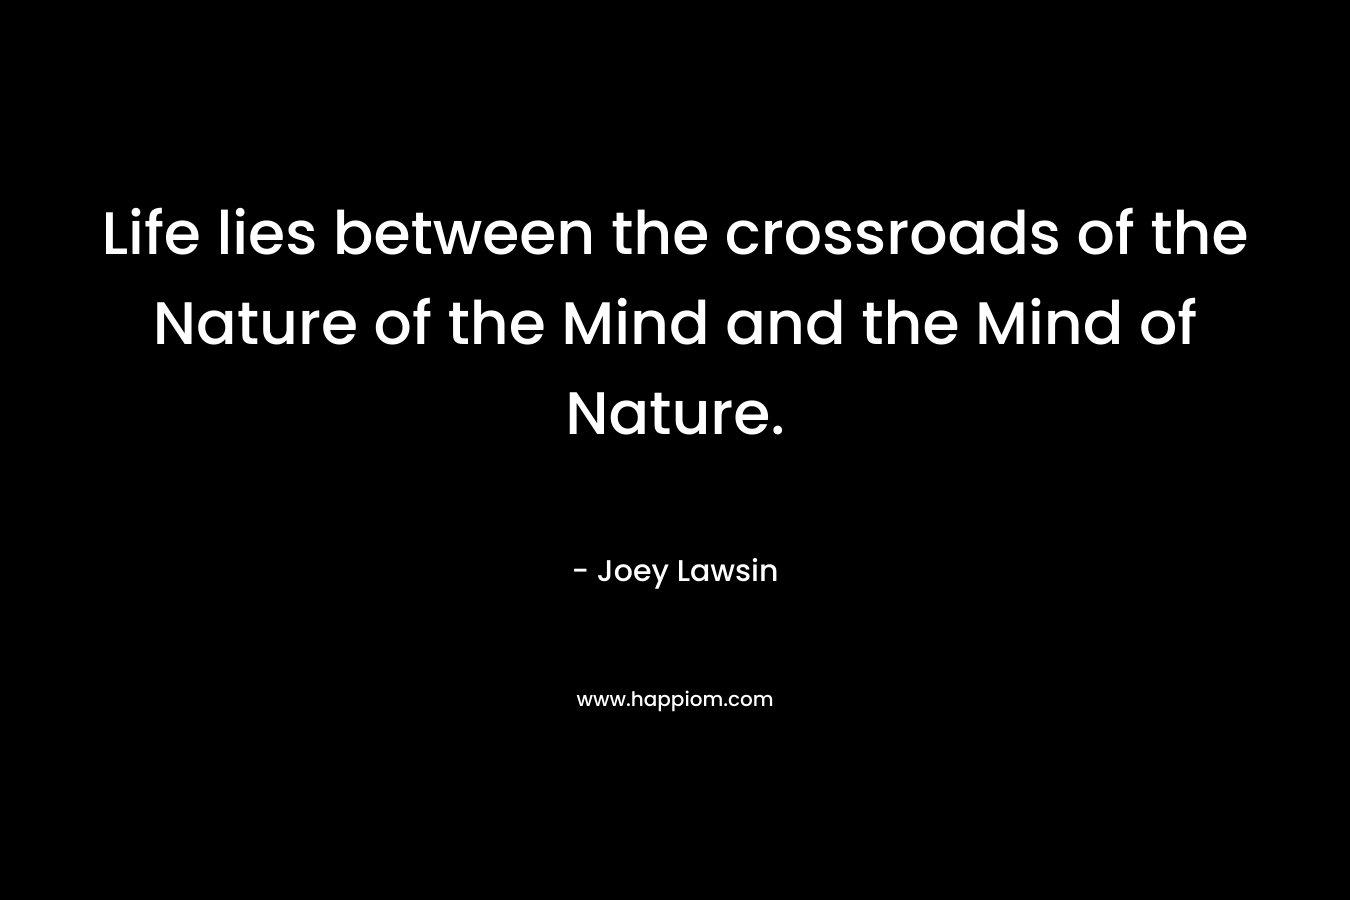 Life lies between the crossroads of the Nature of the Mind and the Mind of Nature.